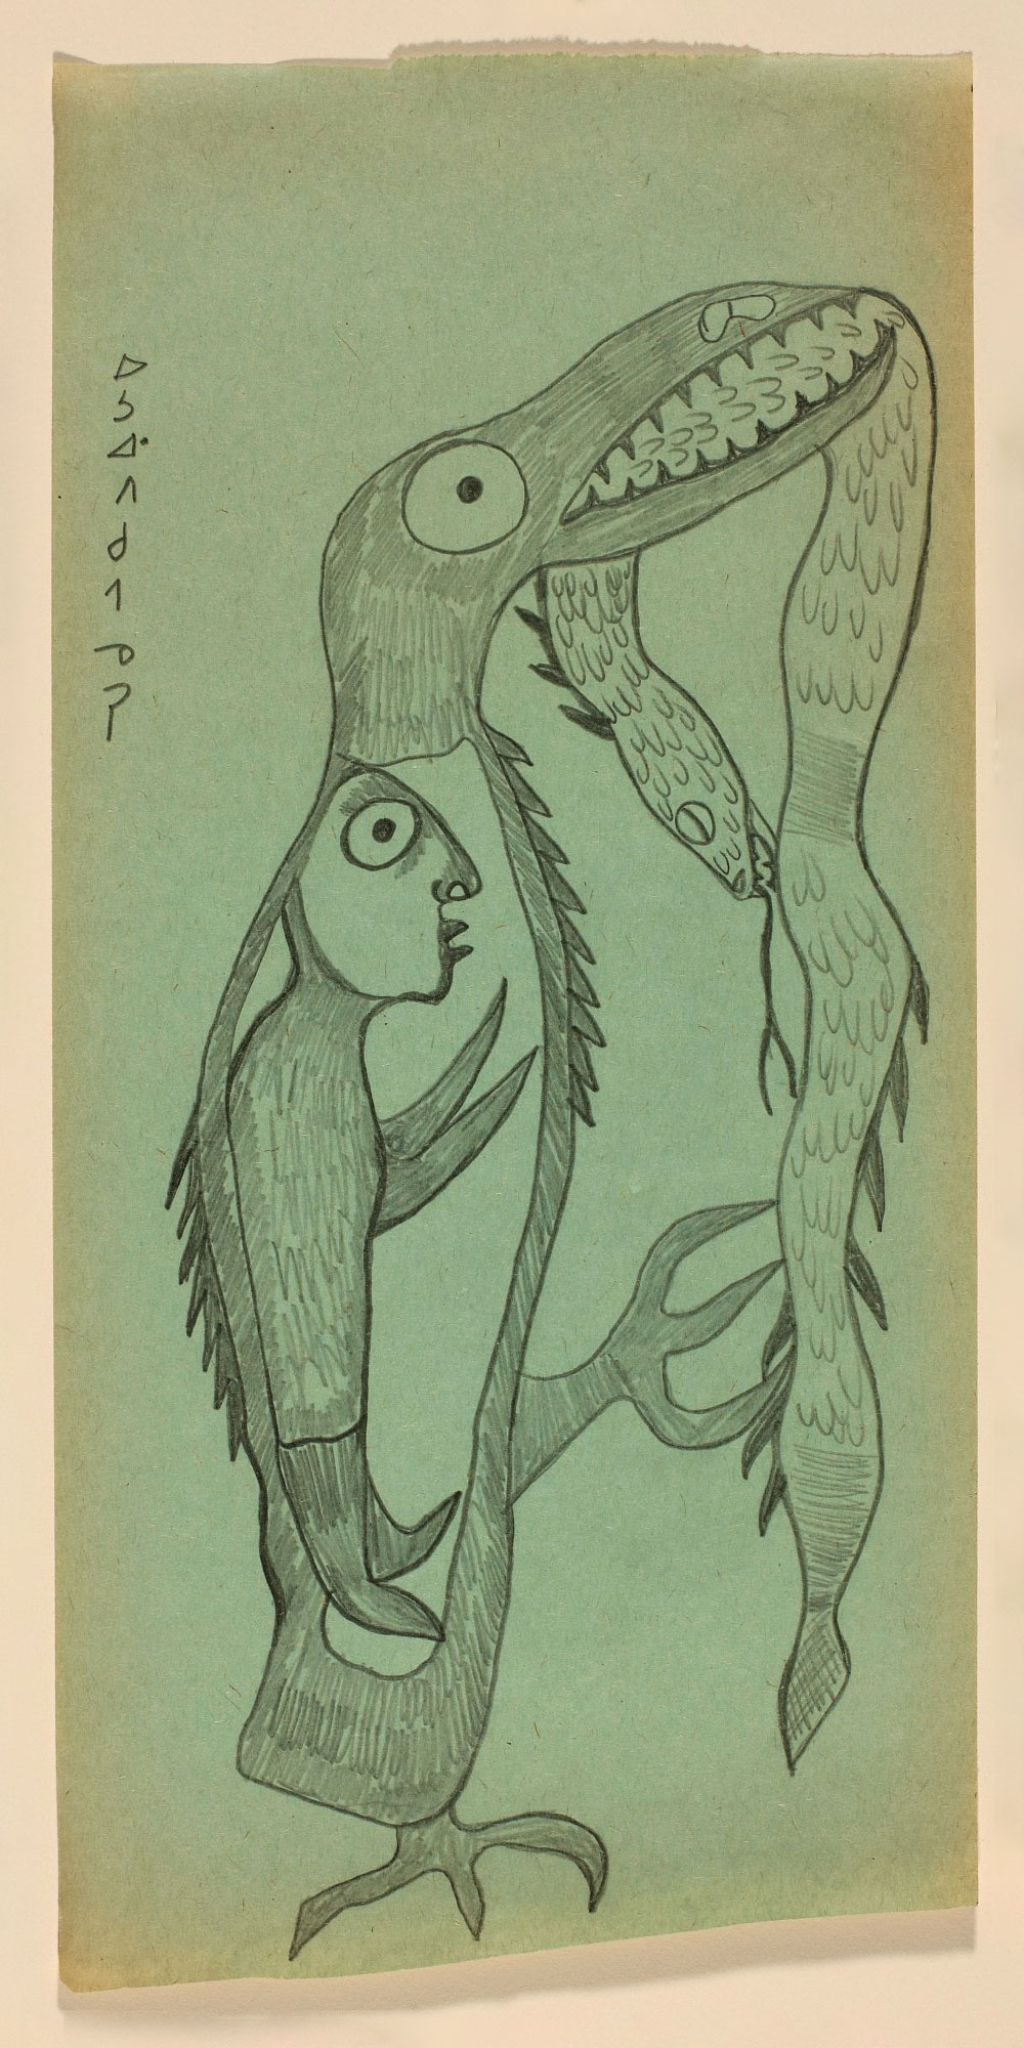 Sketch of a spirit figure within a thunderbird